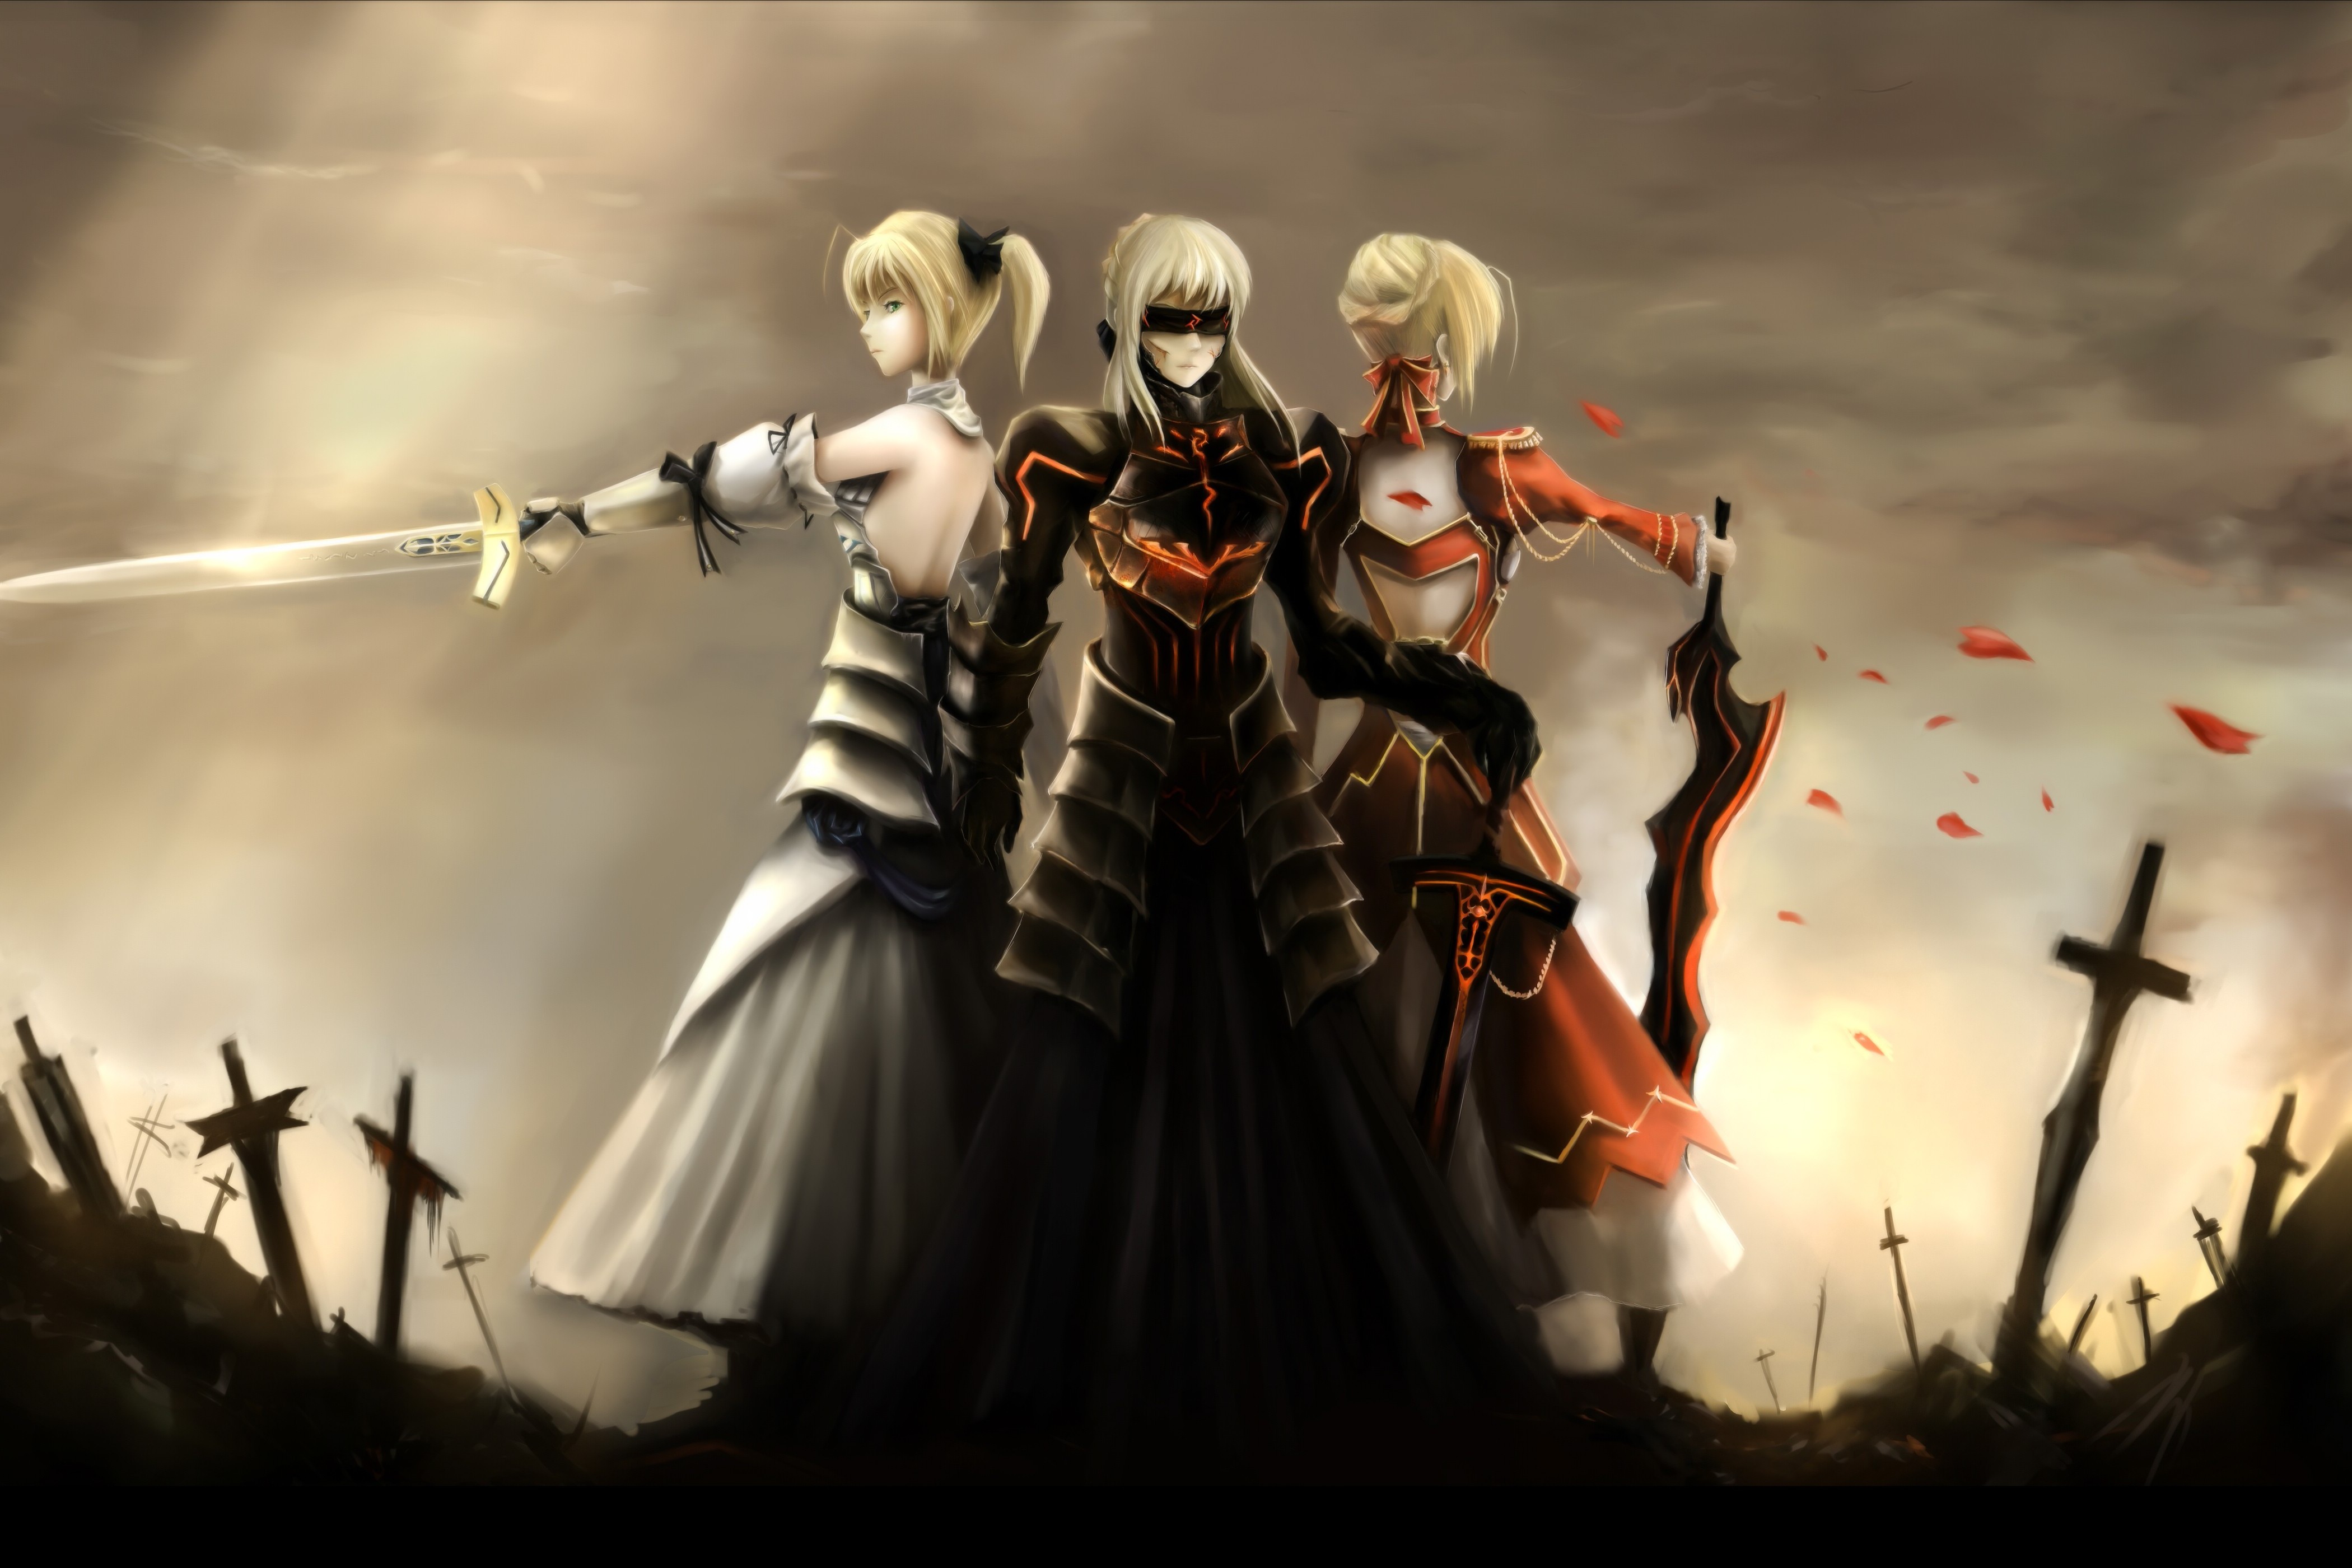 anime, Anime Girls, Fate Series, Saber Alter, Saber Lily, Saber, Fate Stay Night, Saber Extra Wallpaper